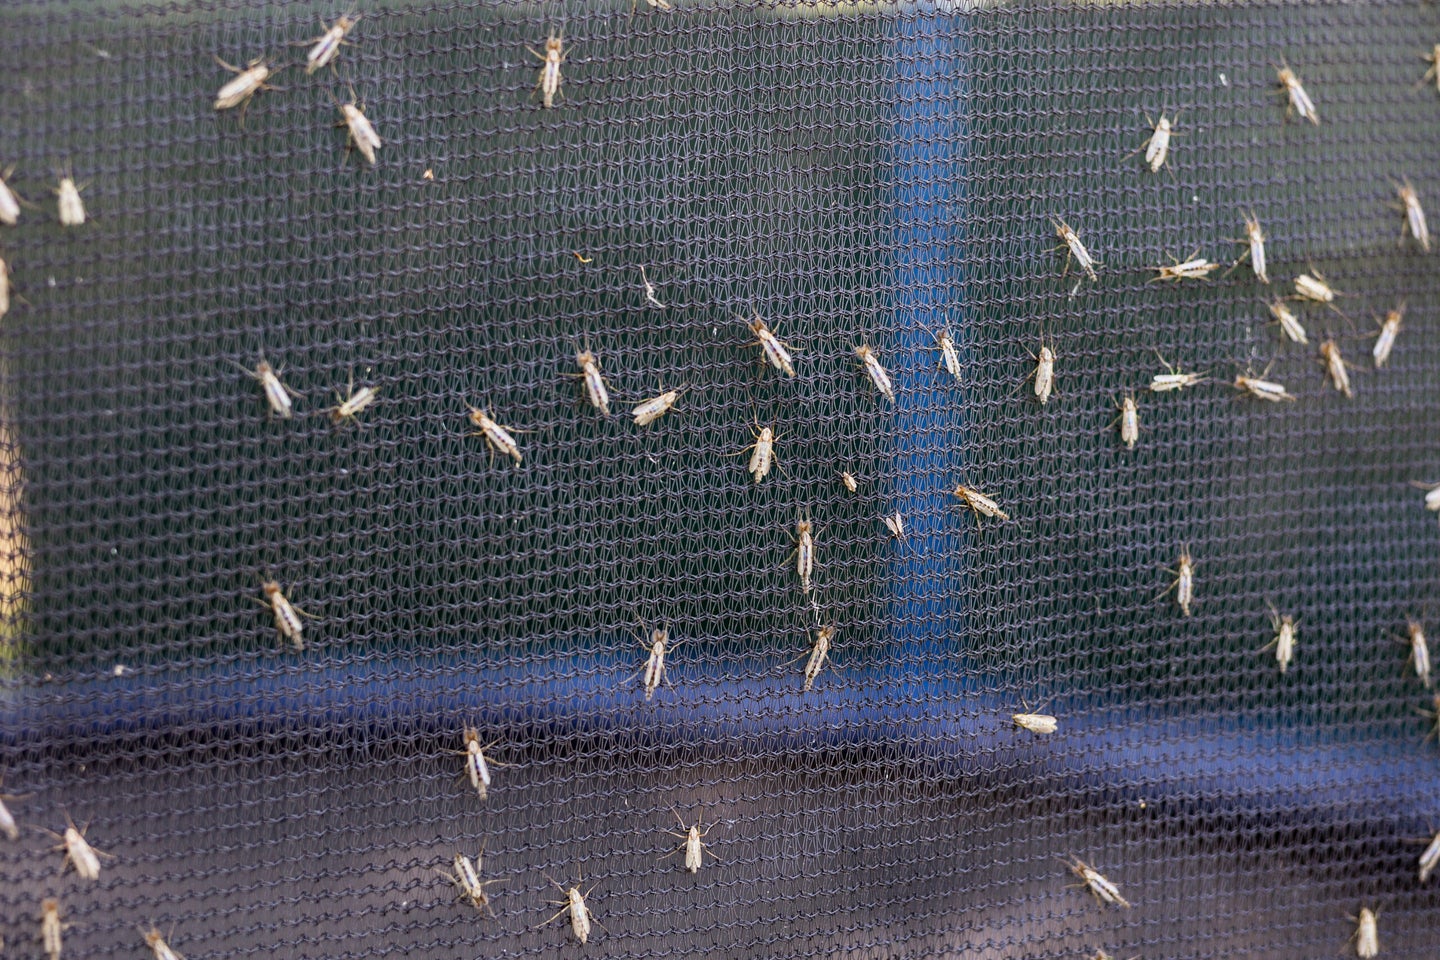 Lot of midges or mosquiotos sitting on balck protective insect screen. Chironomus plumosus.